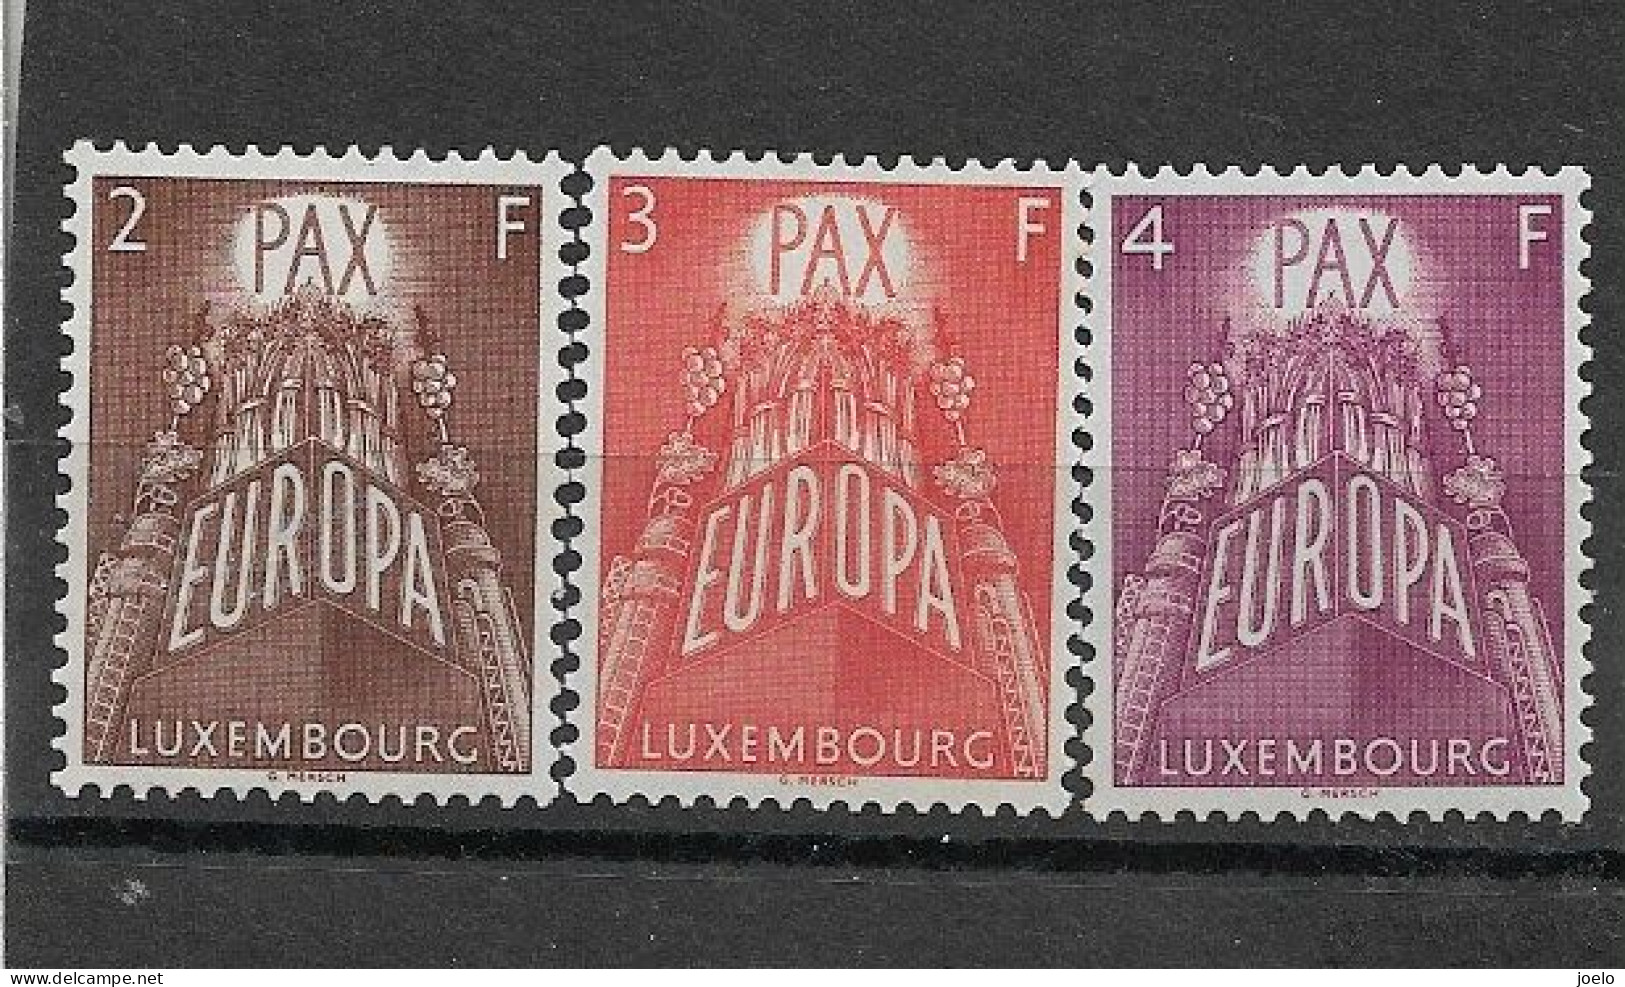 LUXEMBOURG 1957 EUROPA MH SET - Machins